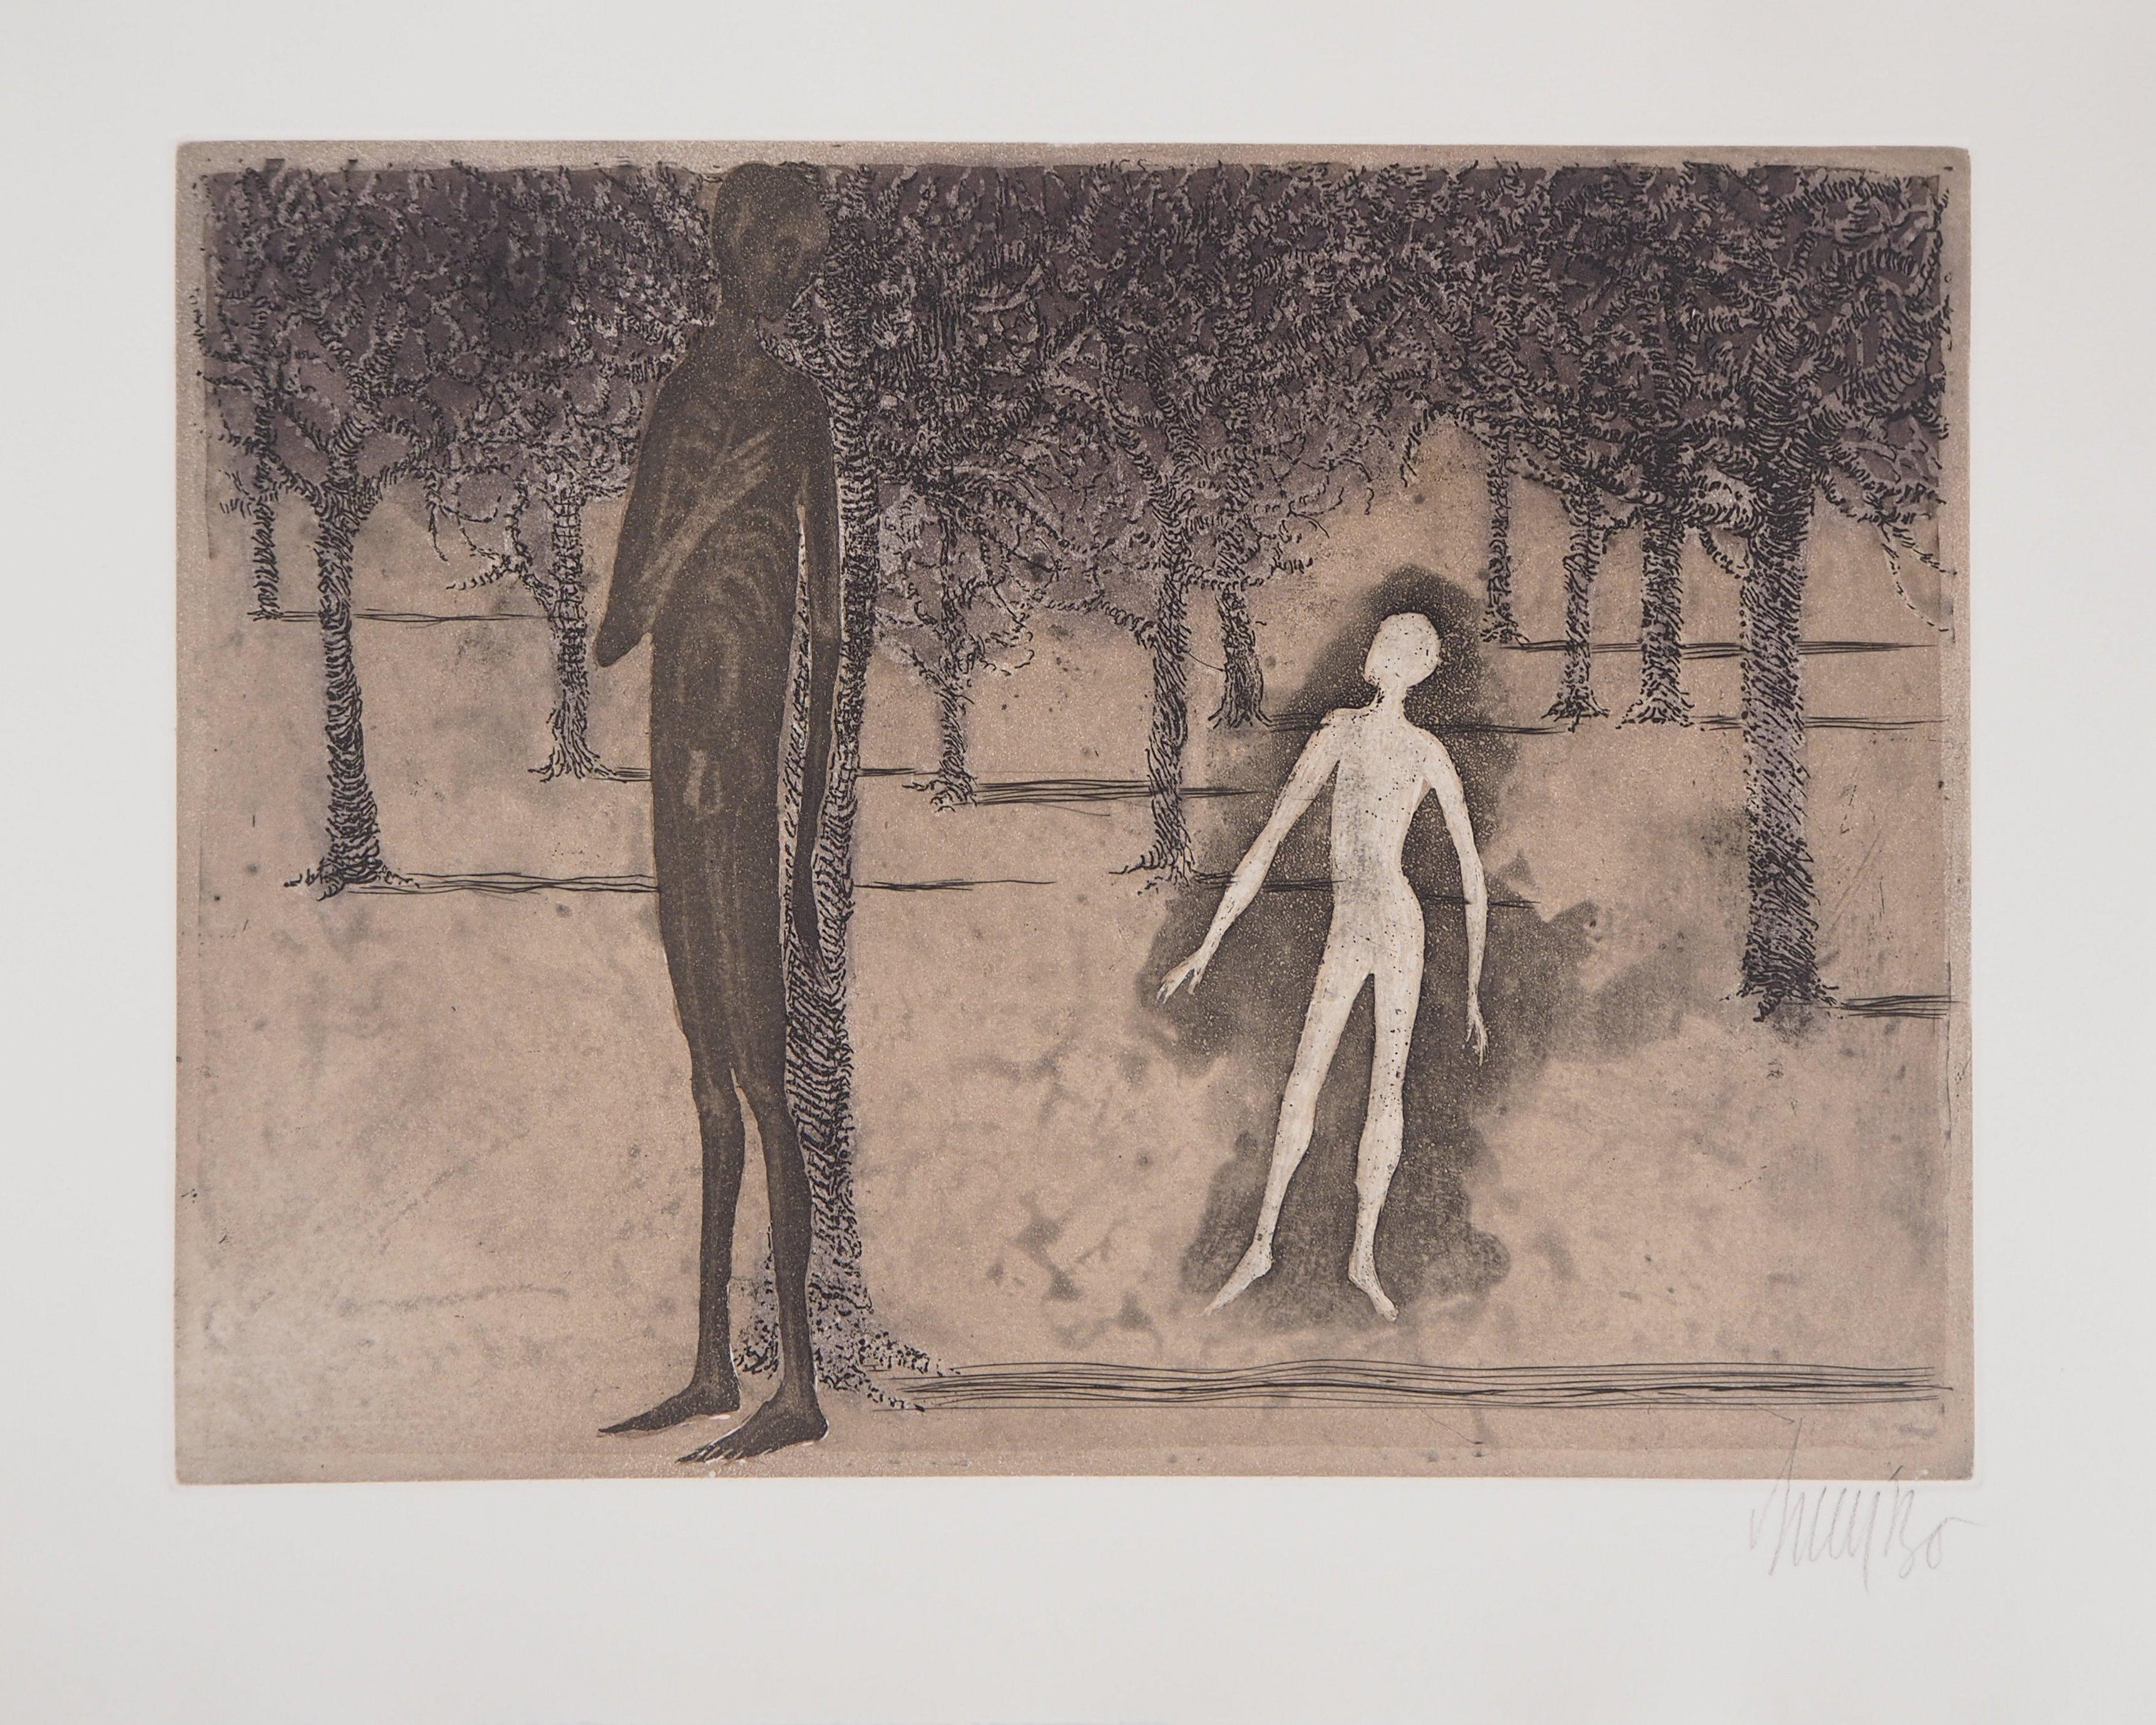 Lars BO
Surrealist encounter (Le Rêve de Jean Valjean 7/8), 1975

Original etching
Handsigned in pencil
On vellum, 36 x 45 cm (c. 14,1 x 17,7 inch)
Edition limited to 100 unnumbered copies

INFORMATION :  This etching is part of the set 